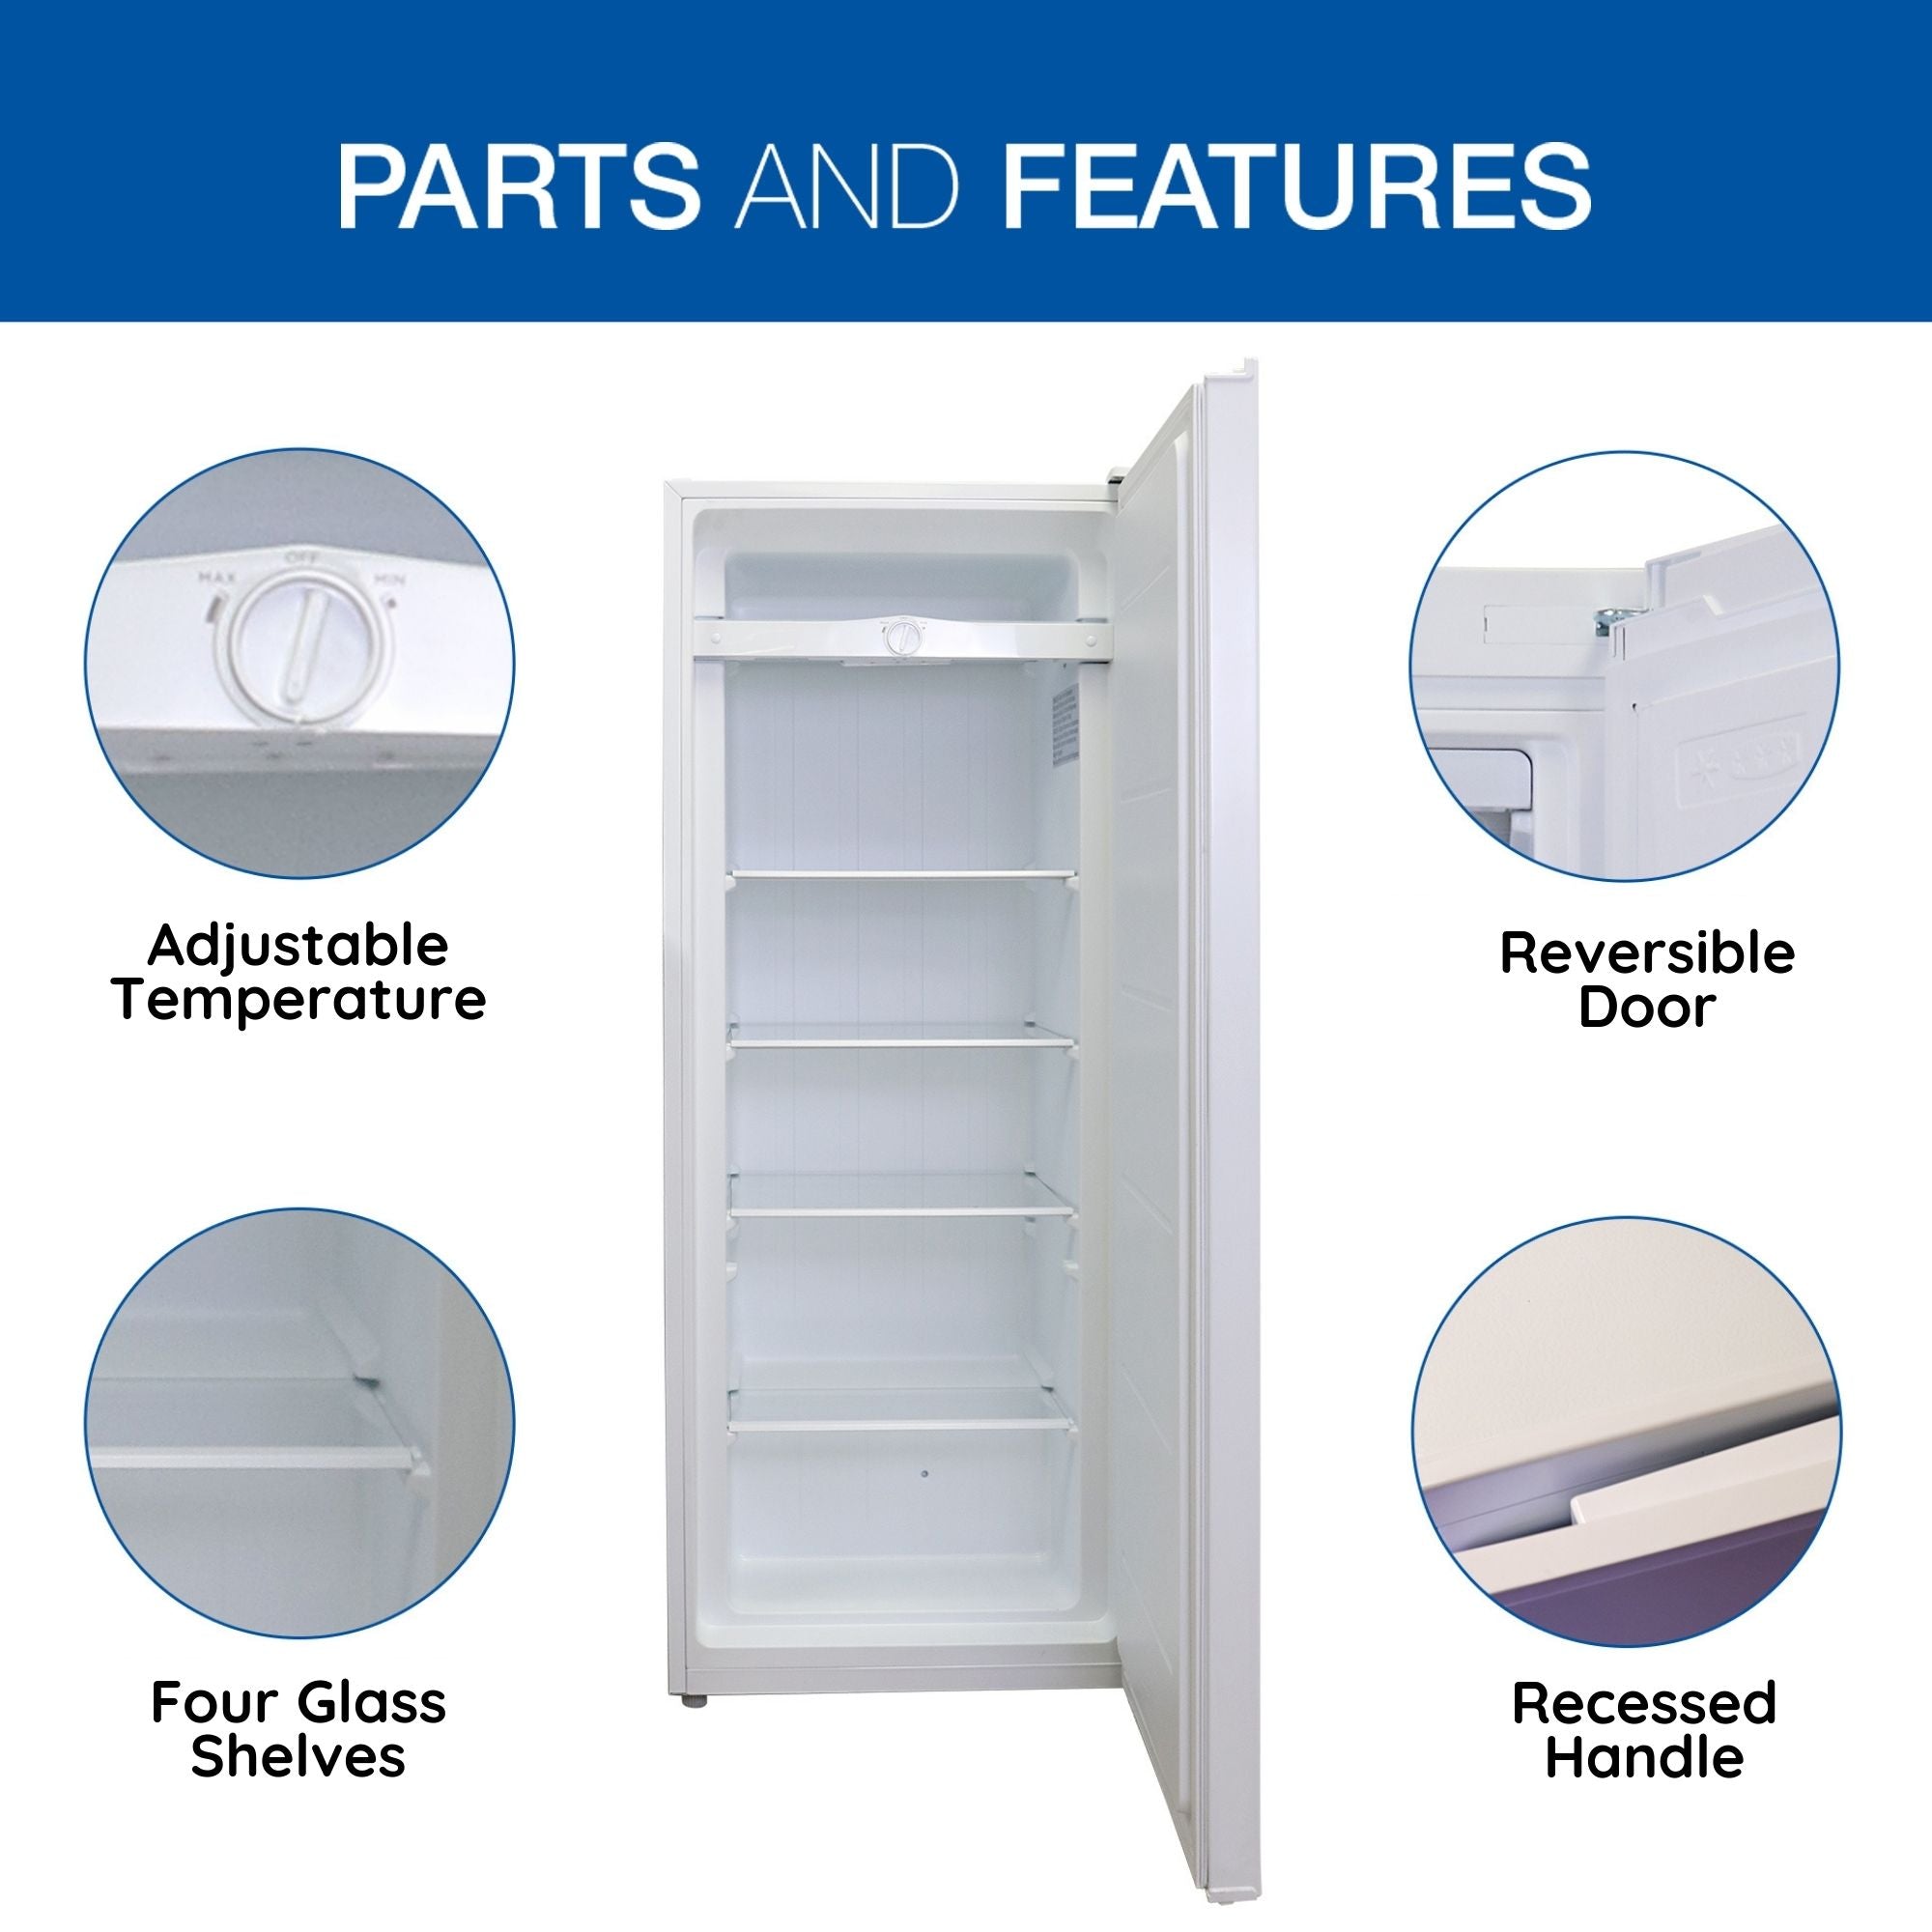 Product shot of open upright freezer surrounded by inset closeup images of parts, labeled: Adjustable temperature; Reversible door; Recessed handle; Four glass shelves